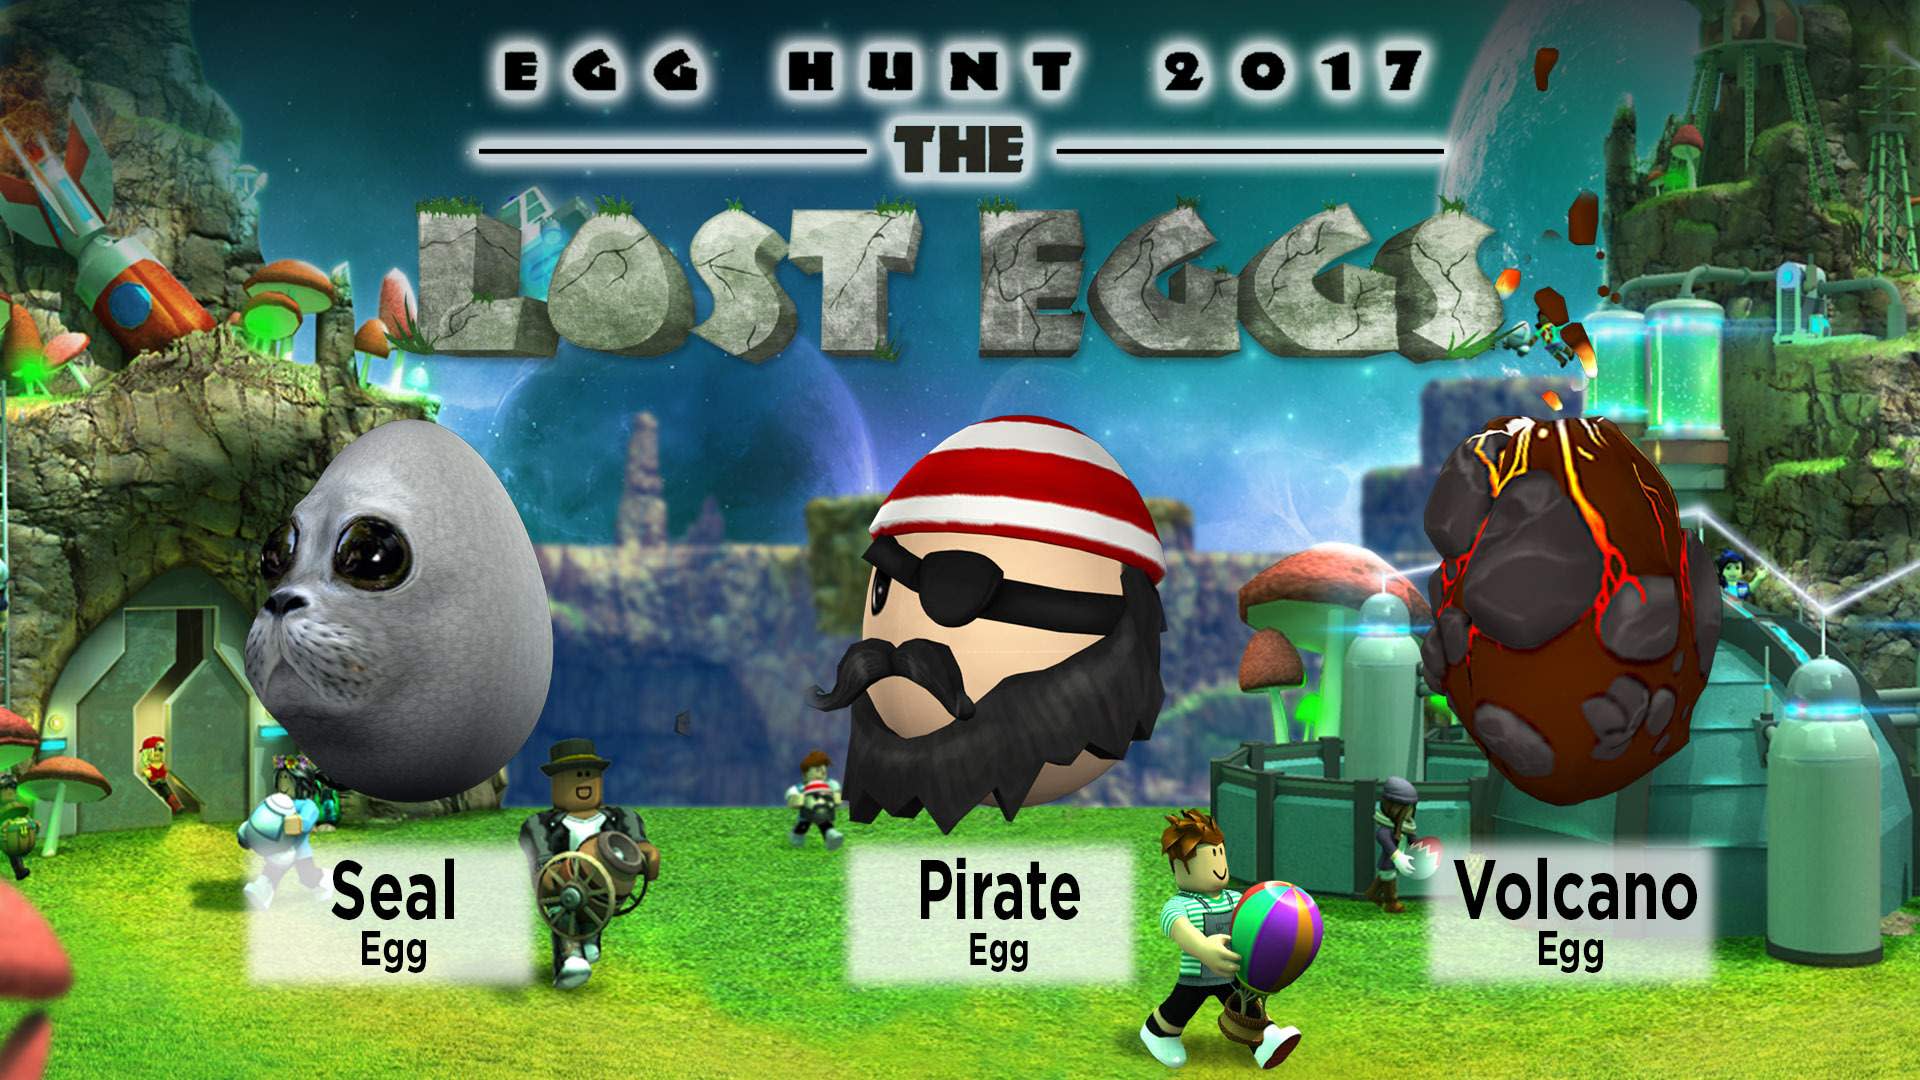 Roblox Egg Hunt 2017 Leaks Everything We Know General News